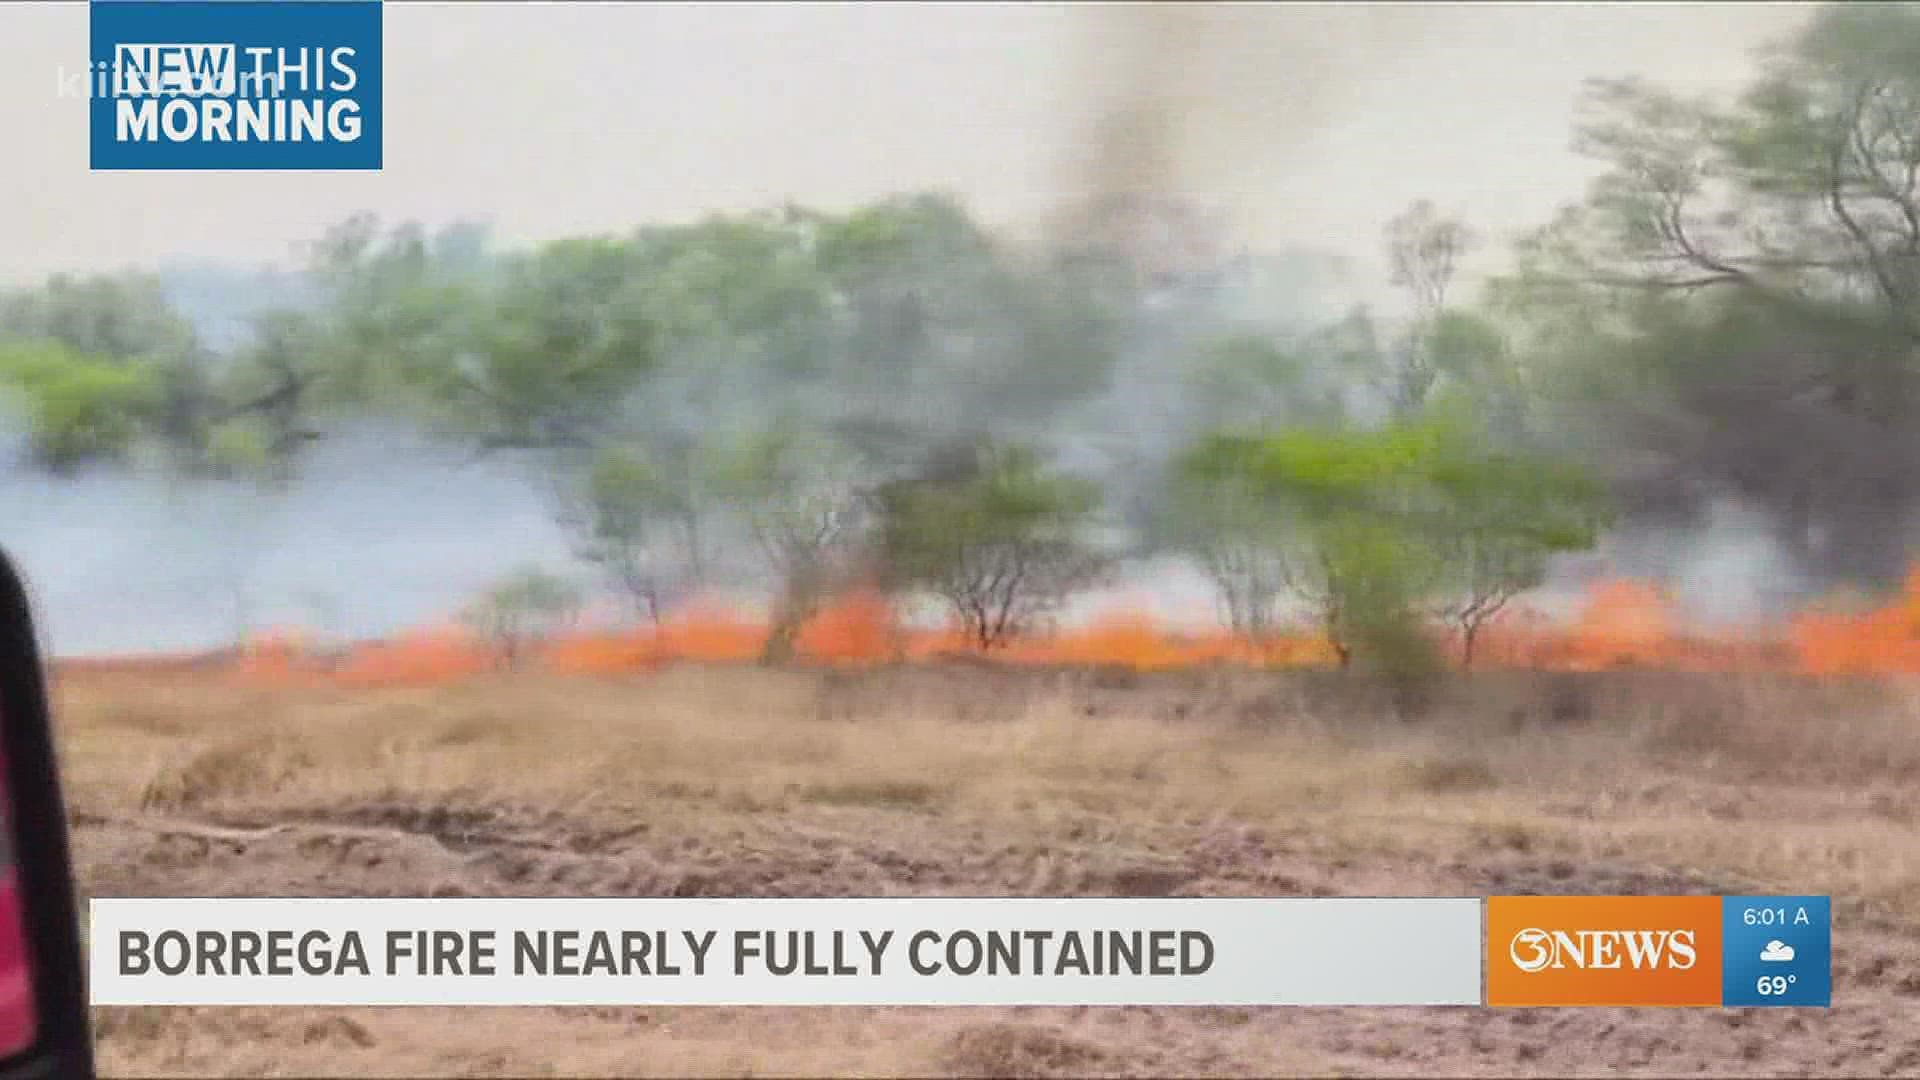 After burning over 50,000 acres, the Borrega fire has been reported as 98% contained.